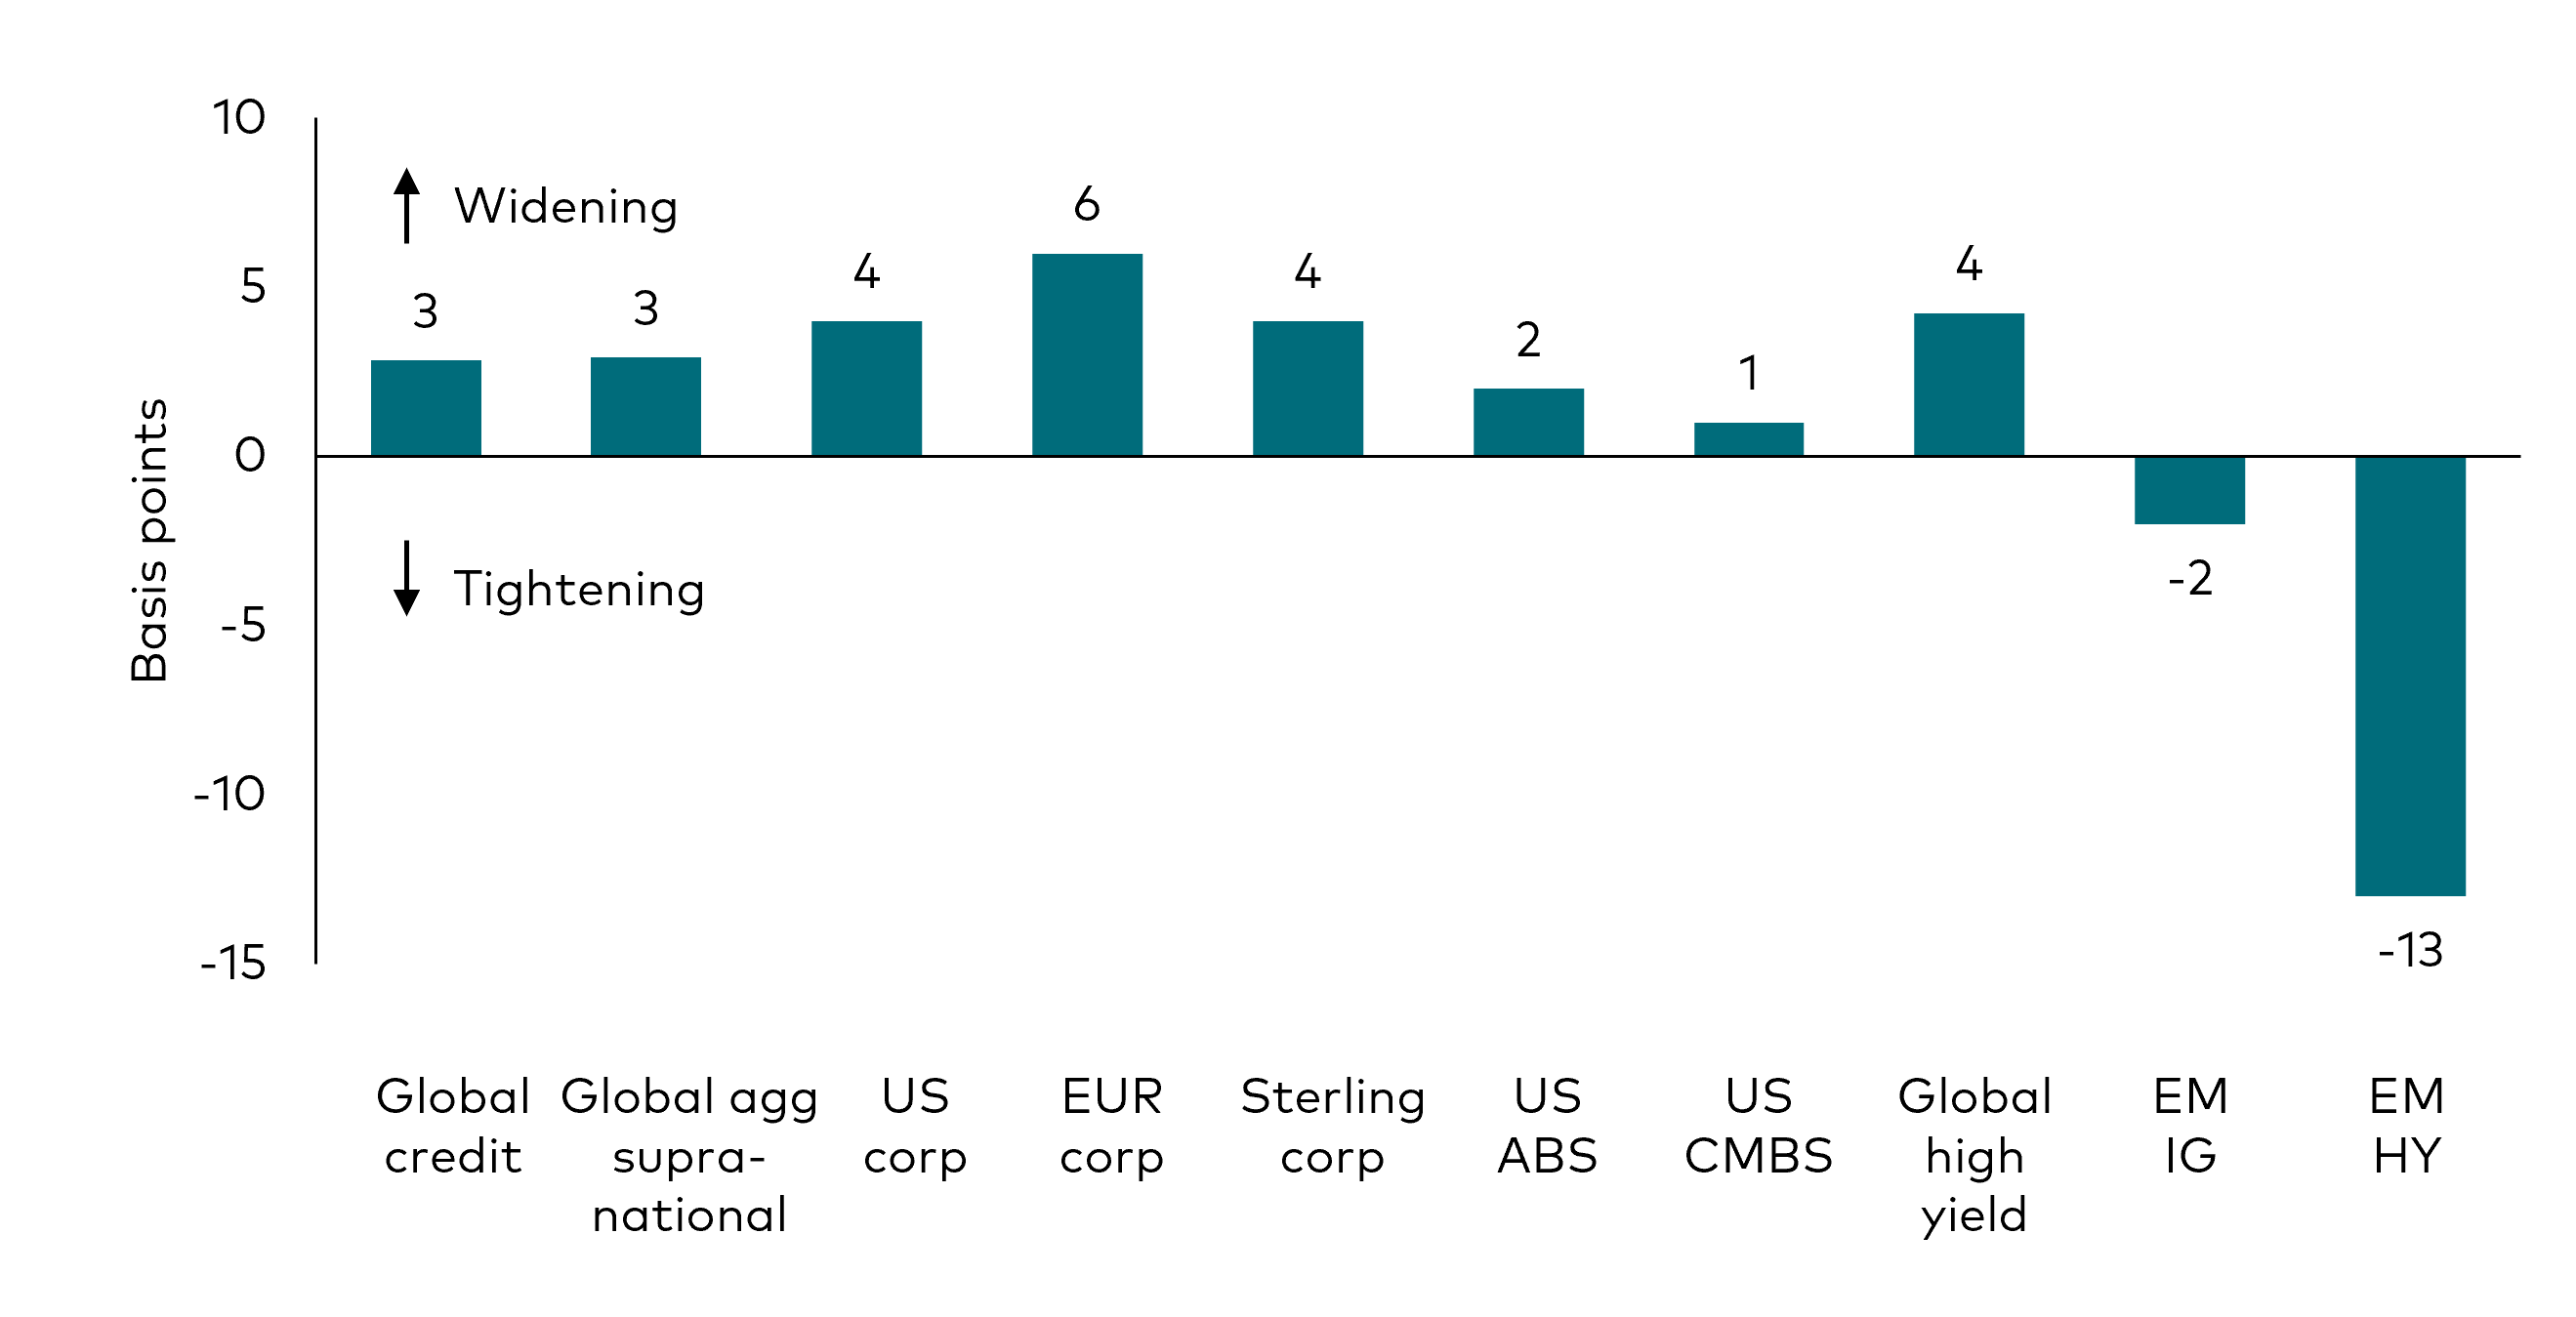 Bar chart showing the quarterly change in credit spreads, in basis points, for various sectors in the credit markets, including global credit, global aggregate supranational credit, US corporate credit, euro-denominated corporate credit, sterling-denominated corporate credit, US asset-backed securities, US commercial mortgage-backed securities, global high yield credit, investment grade emerging market credit and high yield emerging market credit. 